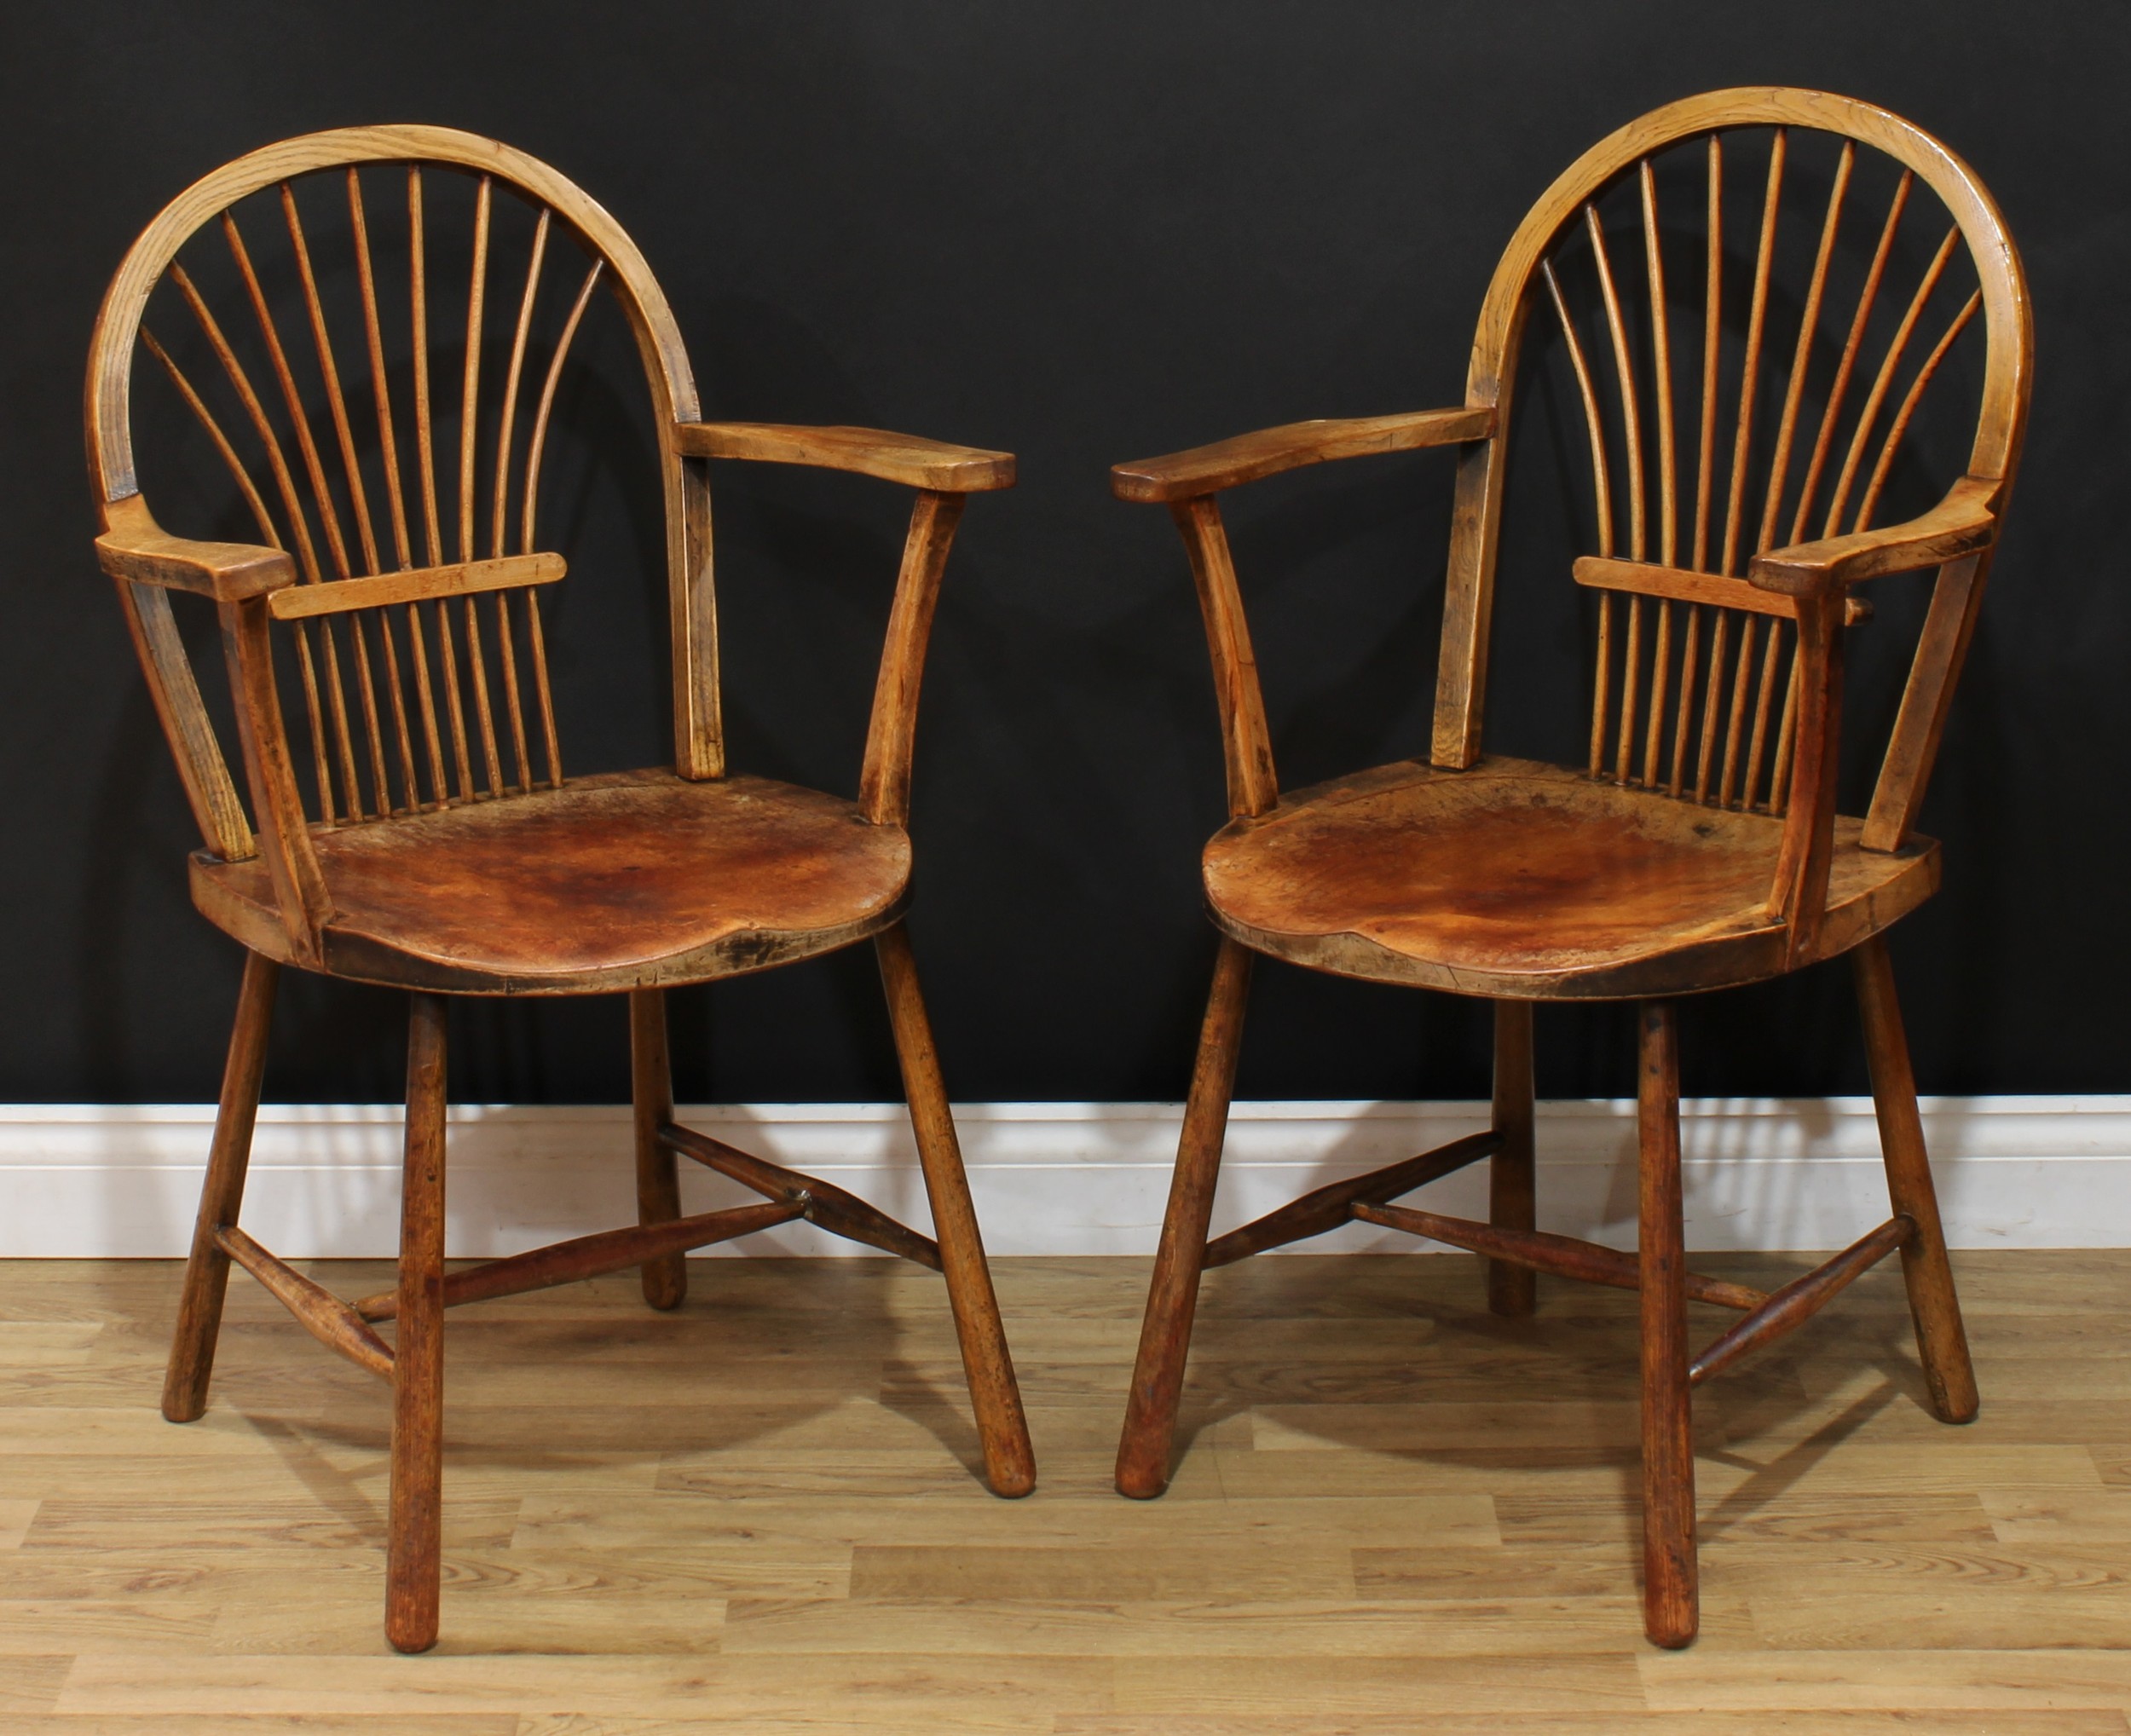 A pair of 19th century sheaf-back elbow chairs, of Windsor chair construction, hoop backs, saddle